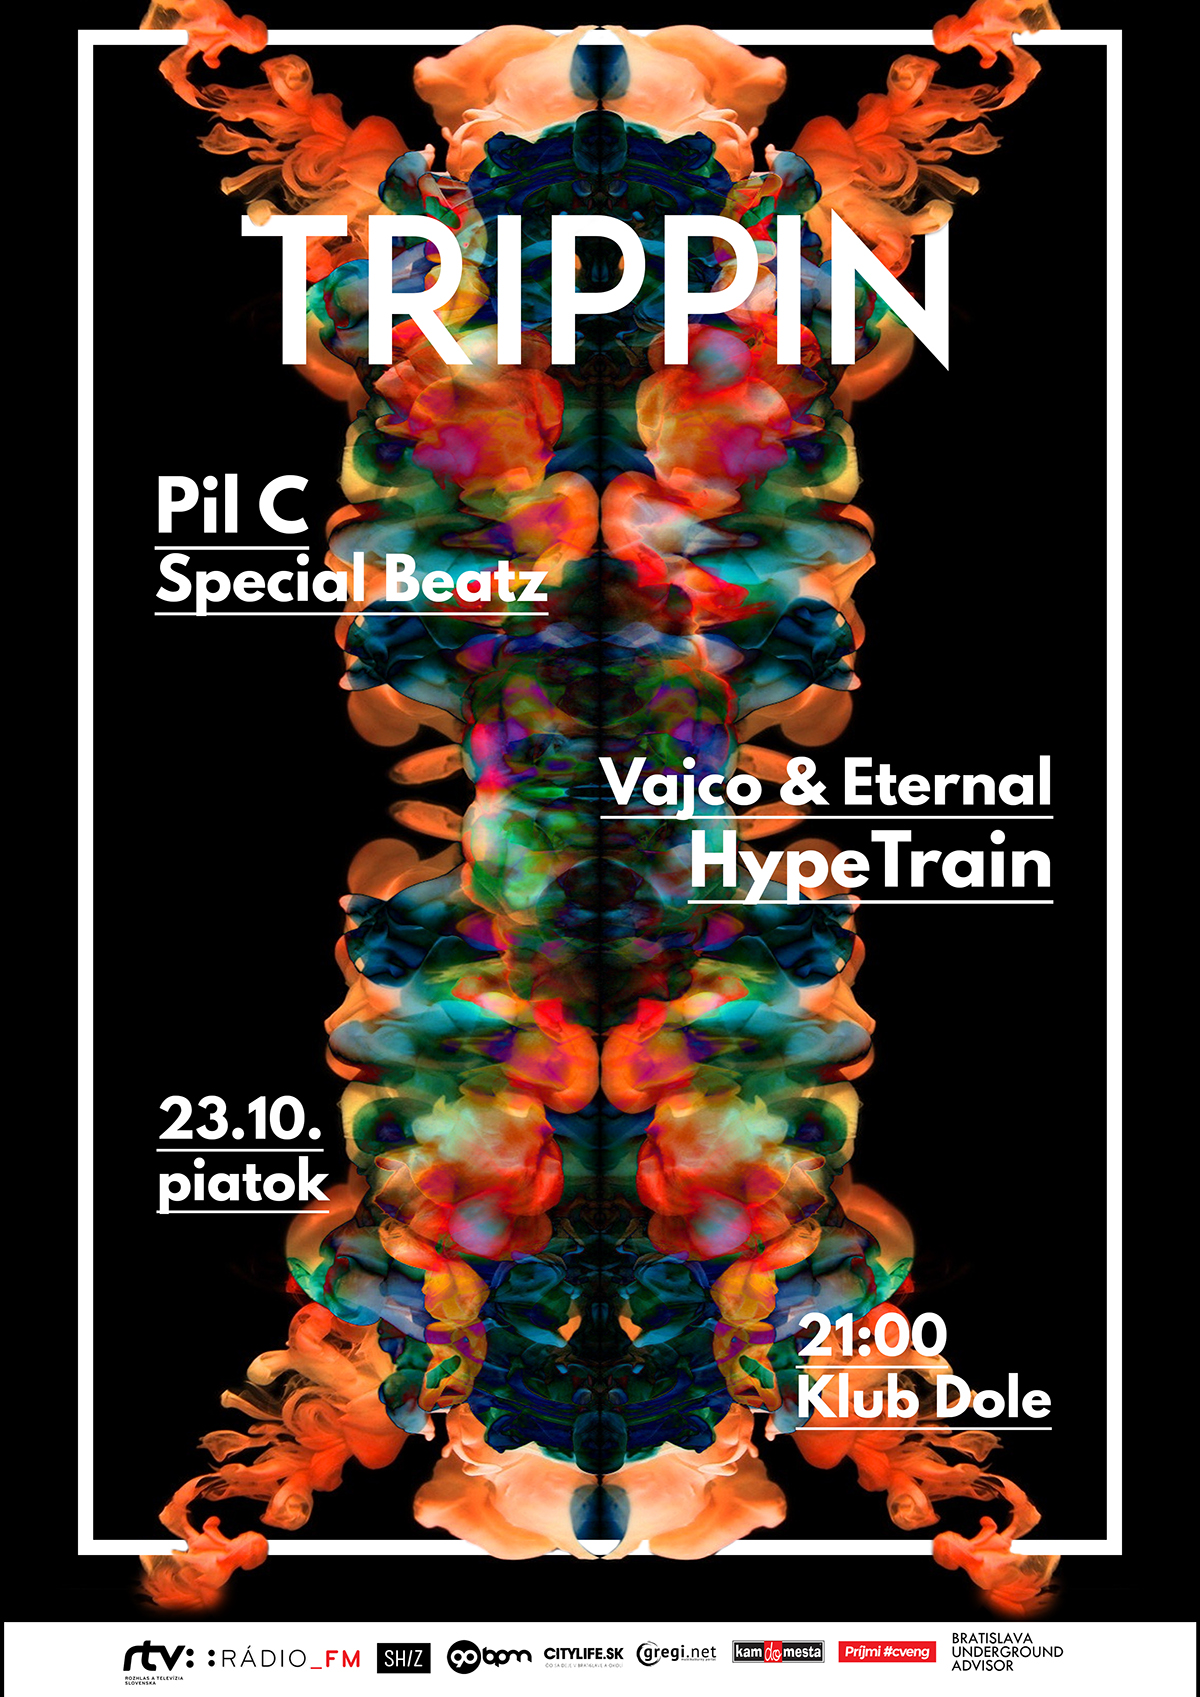 Trippin trippy Psychedlic hip-hop hip hop party club poster facebook banner